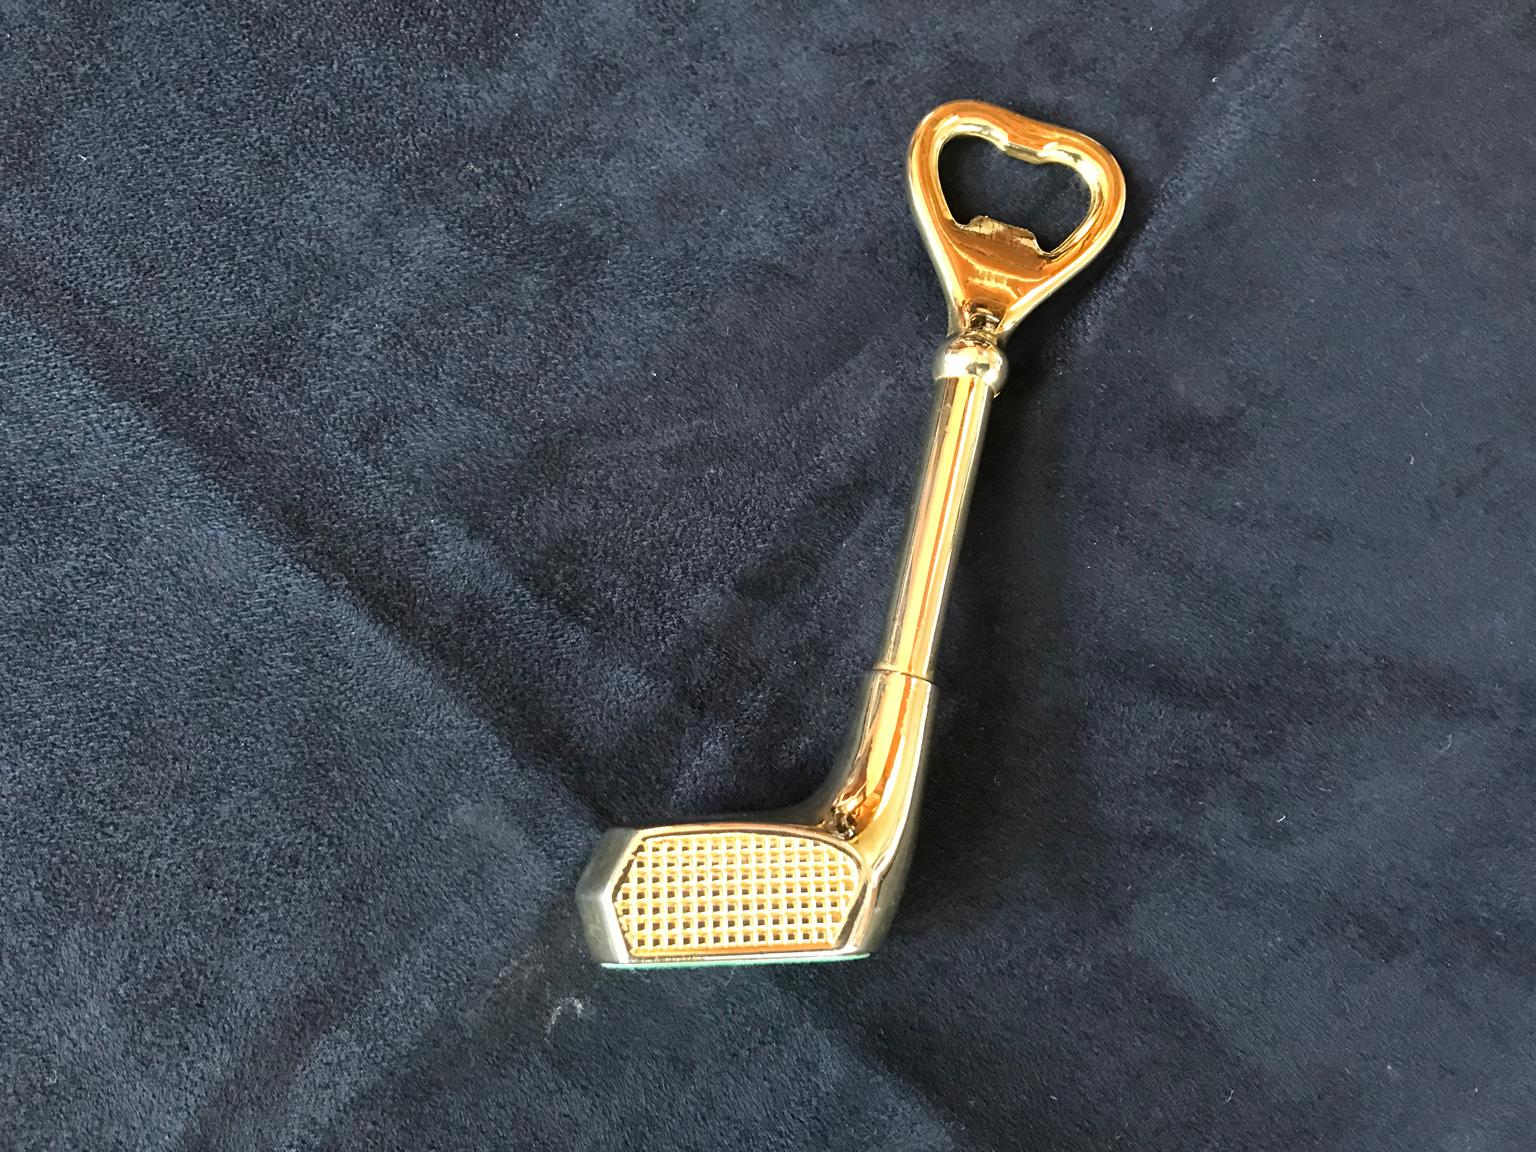 Golf Mid-Century Modern golden bottle opener, by Maison Lancel France, 1960s
In a very good condition.